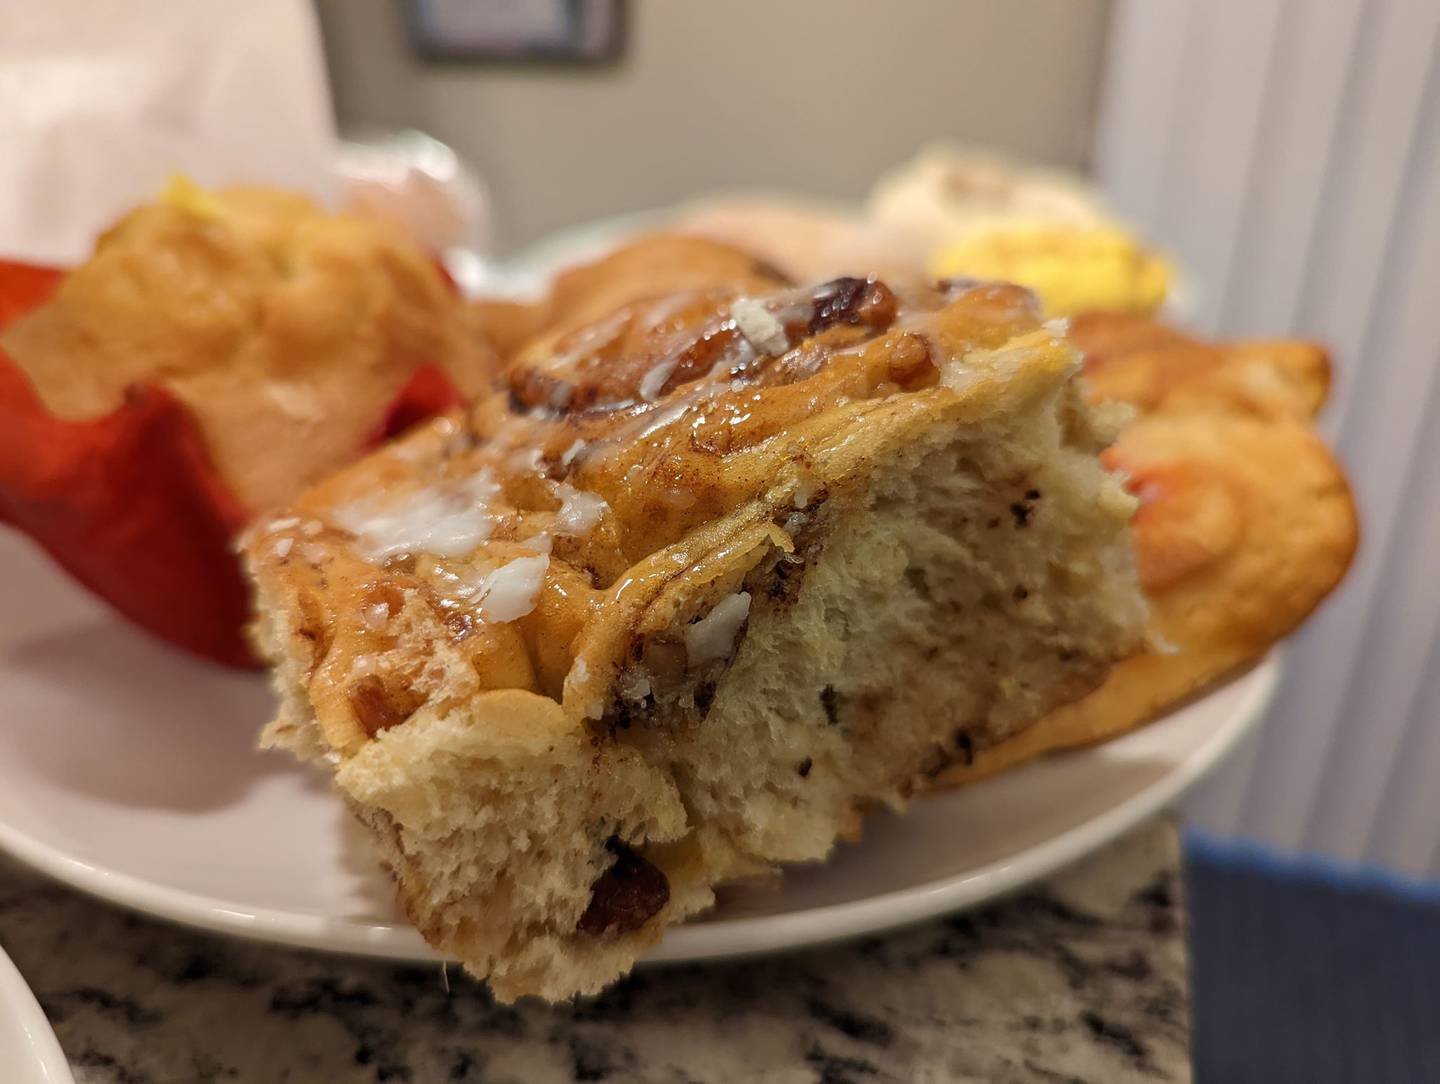 La Chicanita Bakery in Crest Hill offers a wide variety of homemade breads and pastries, juices, sandwiches and custom cakes. The coffee cake in front was flavored with anise.